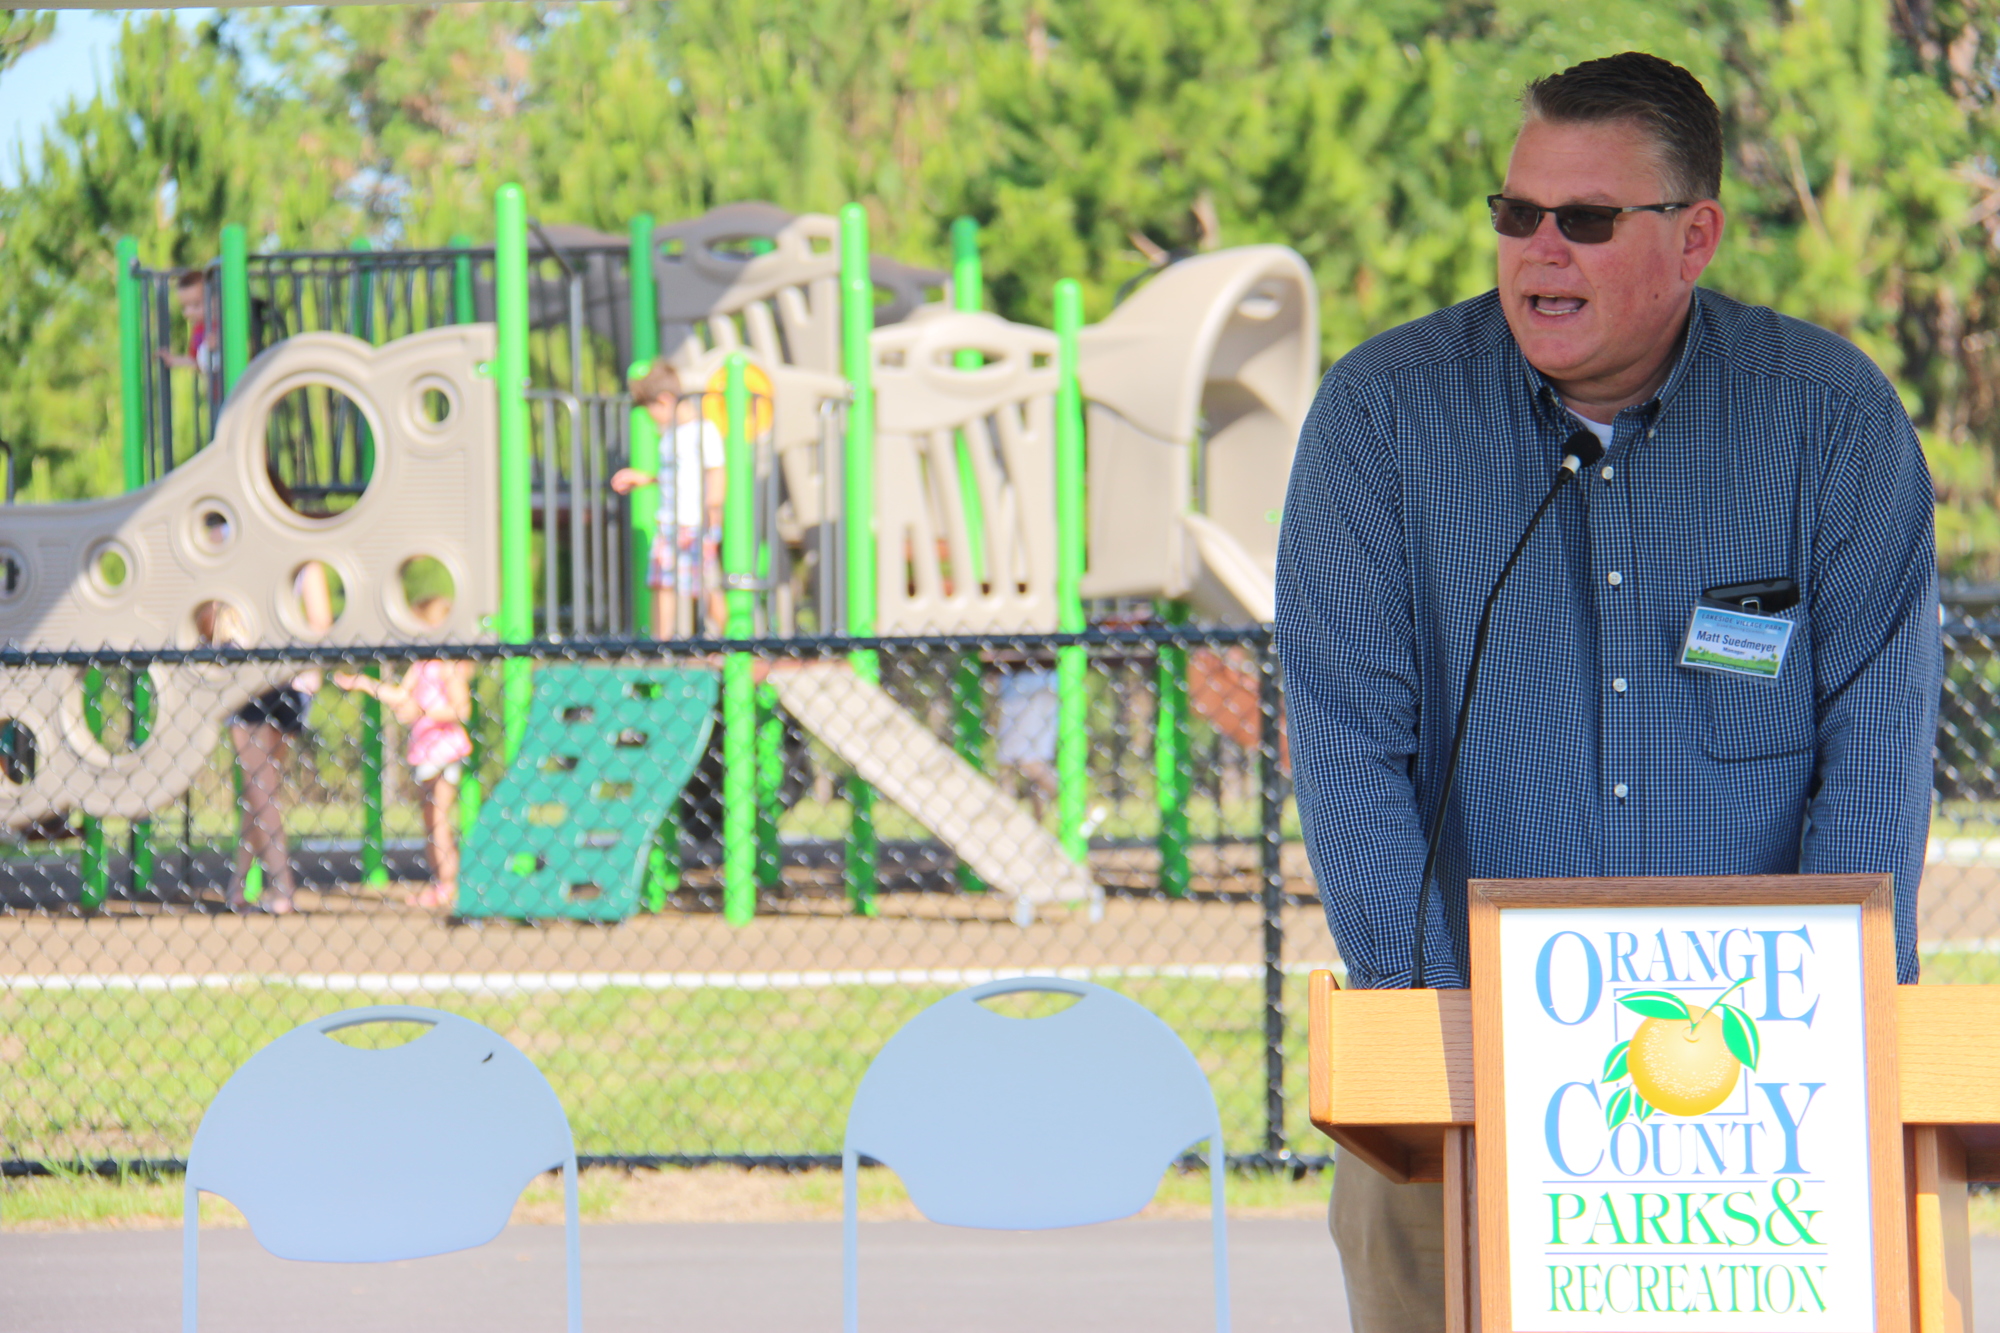 Orange County Parks and Recreation Manager Matt Suedmeyer gave a speech at the ribbon-cutting event.